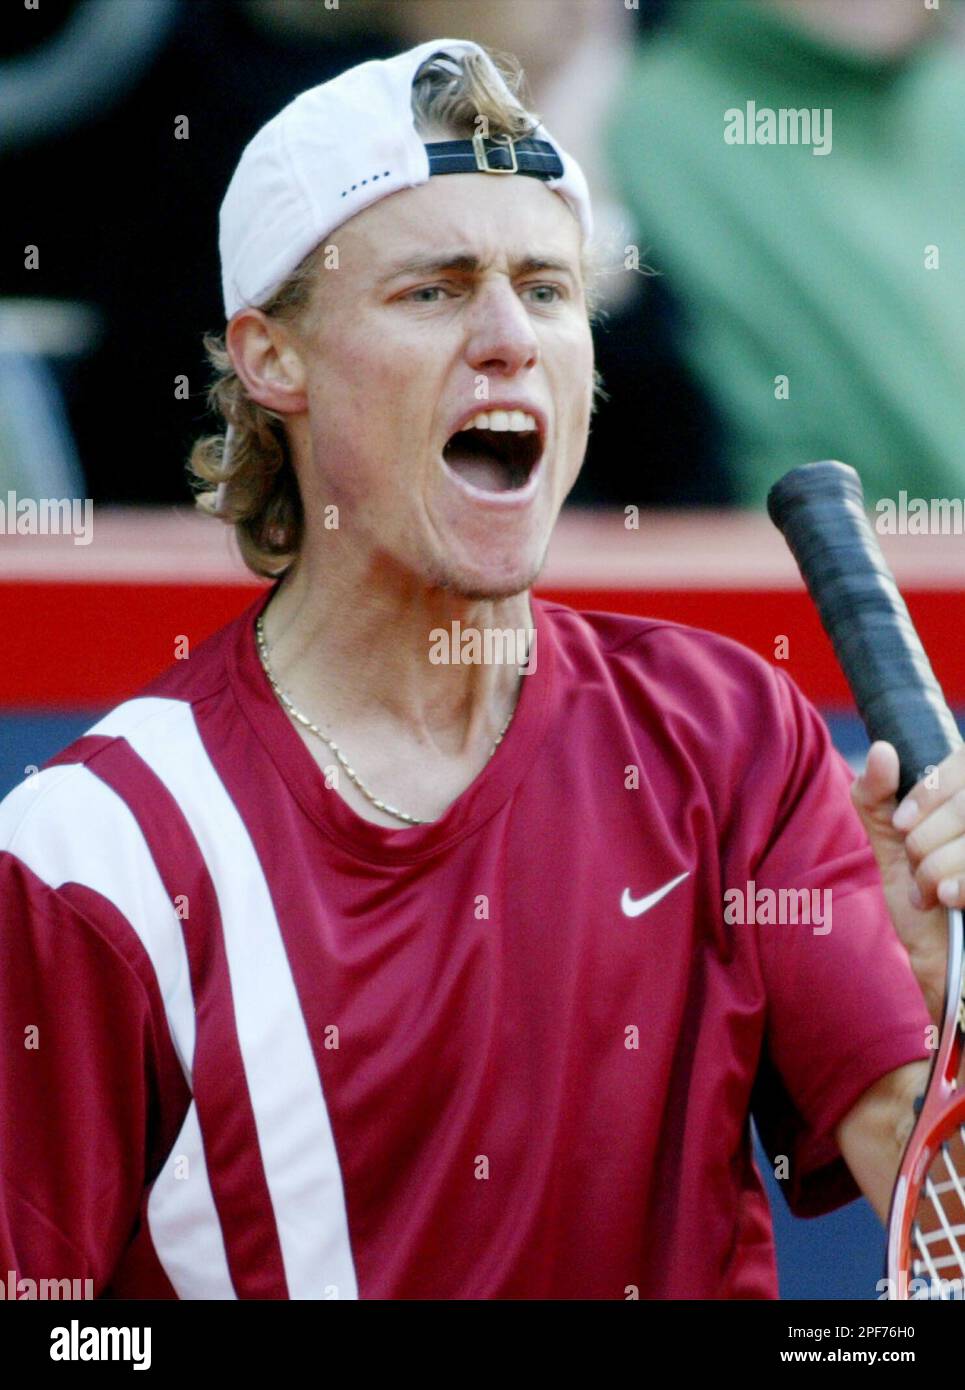 A dejected Lleyton Hewitt from Australia shouts in frustration during his match against Fernando Gonzales from Chile during current Tennis Masters Hamburg 2003 in Hamburg, northern Germany, on Thursday, May 15, 2003.